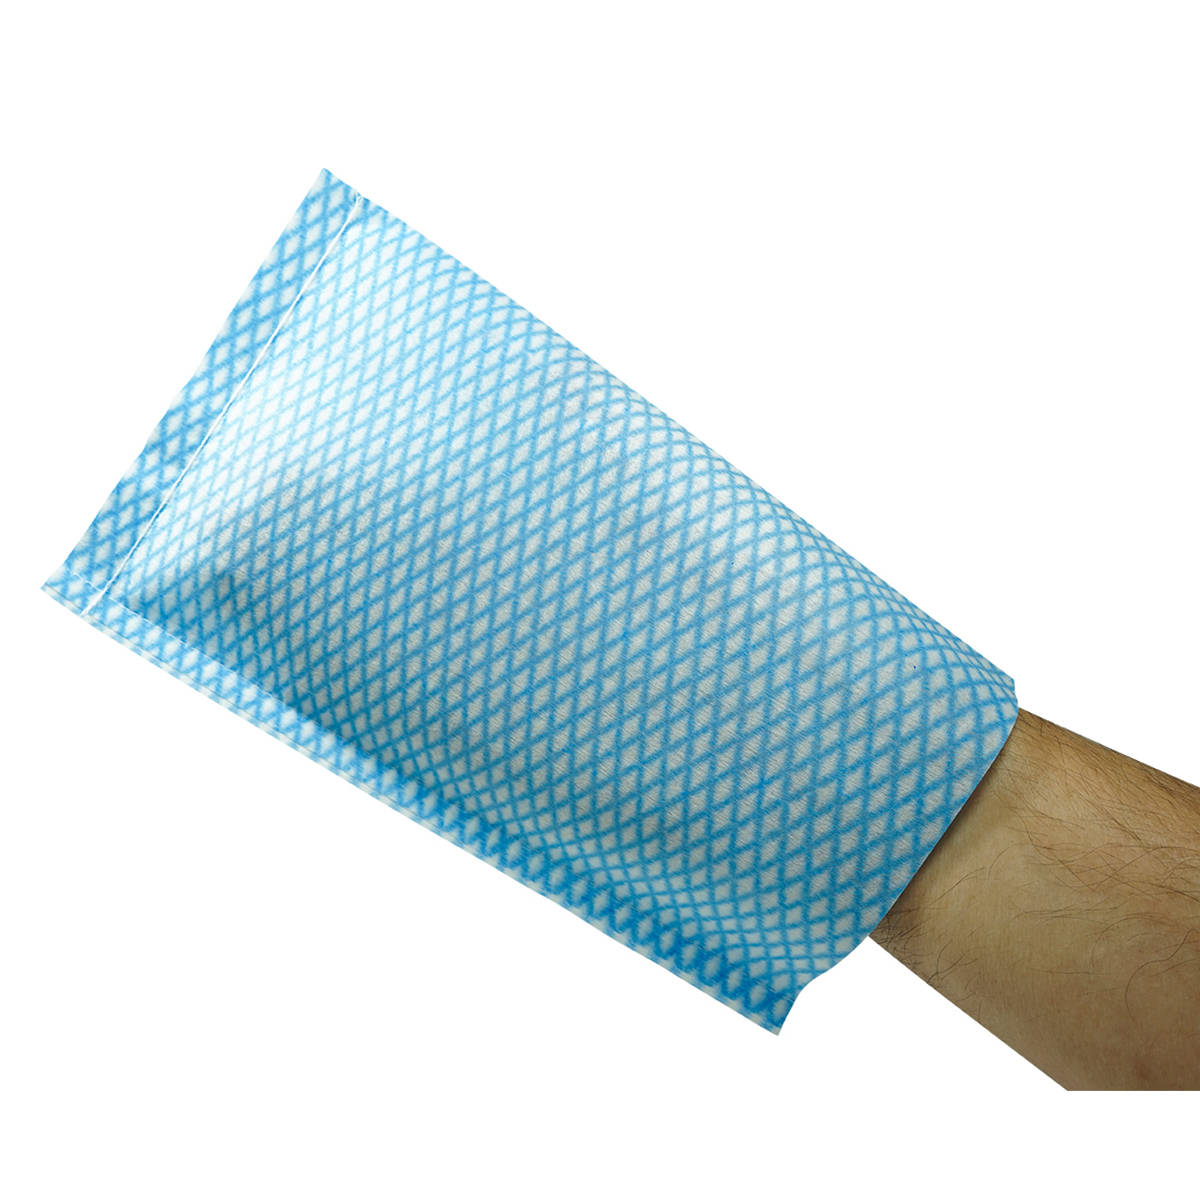 Blue non-woven washcloth on hand